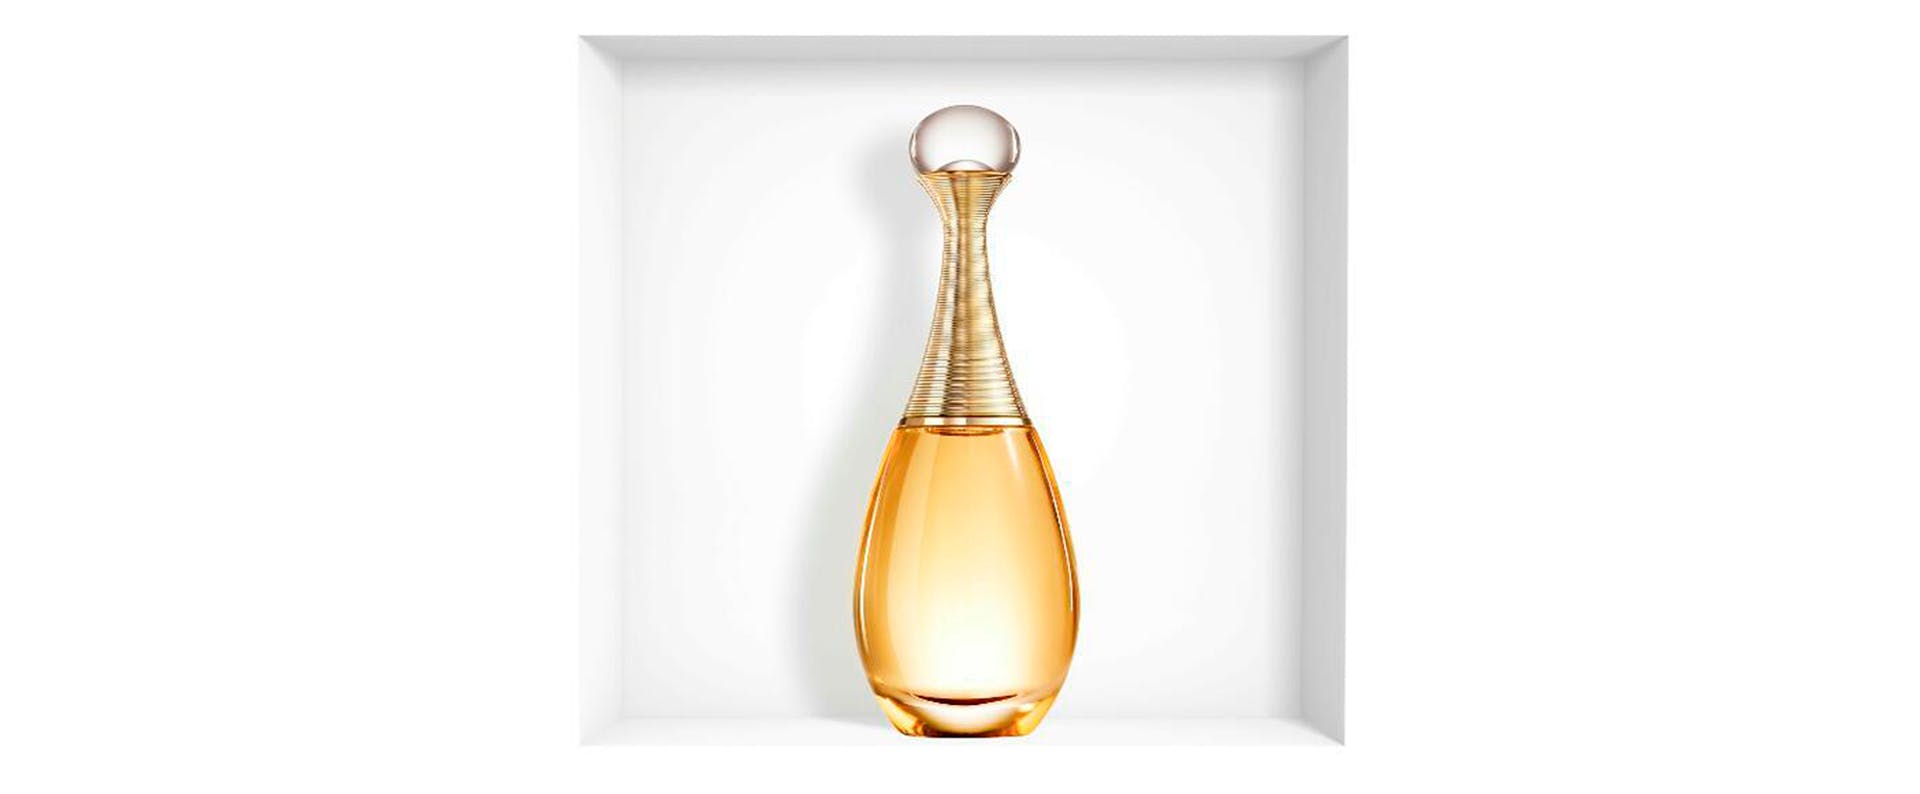 Perfumes for women: Chanel No. 5, Dior, Marc Jacobs Daisy, Guerlain  Shalimar and other cl